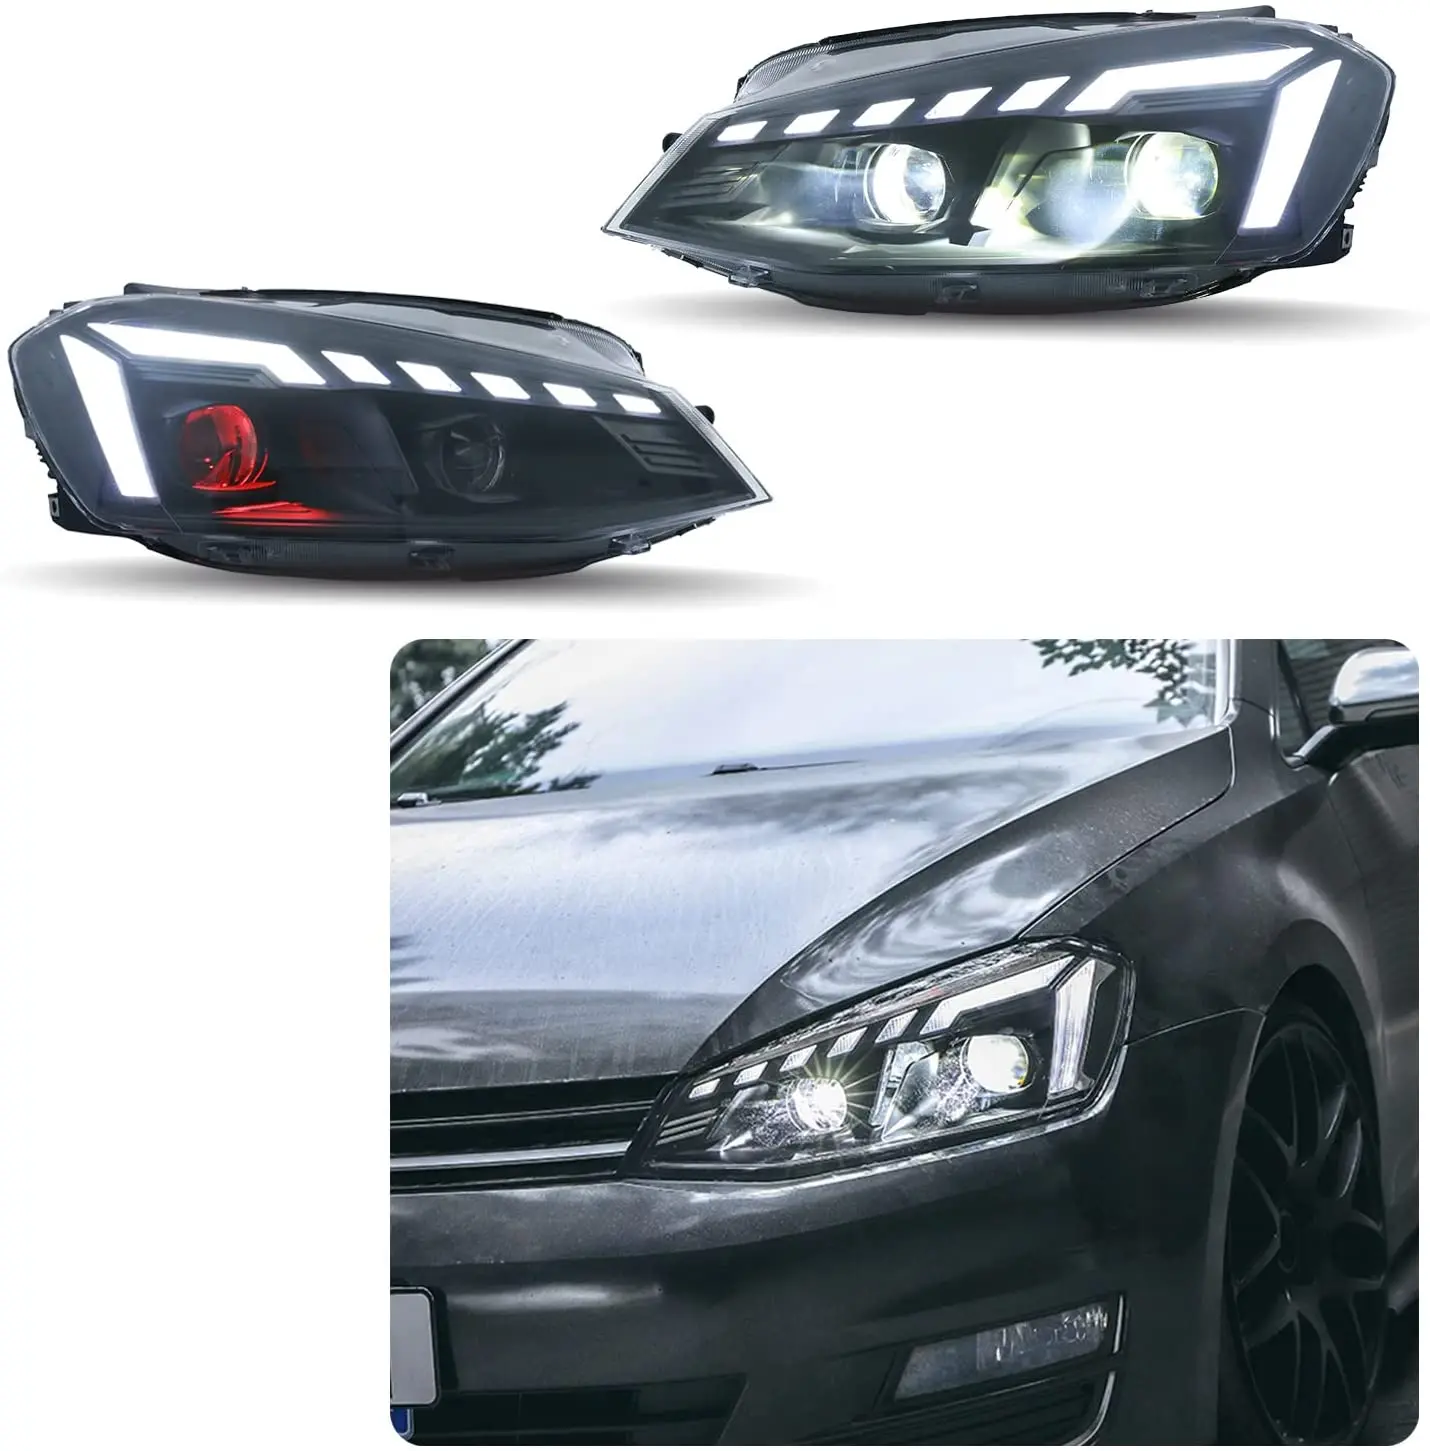 

LED Headlights For VW Volkswagen Golf VII 7 MK 7 2014 2015 2016 2017 2018 2019 With The Start Up Animation Sequential Indicator